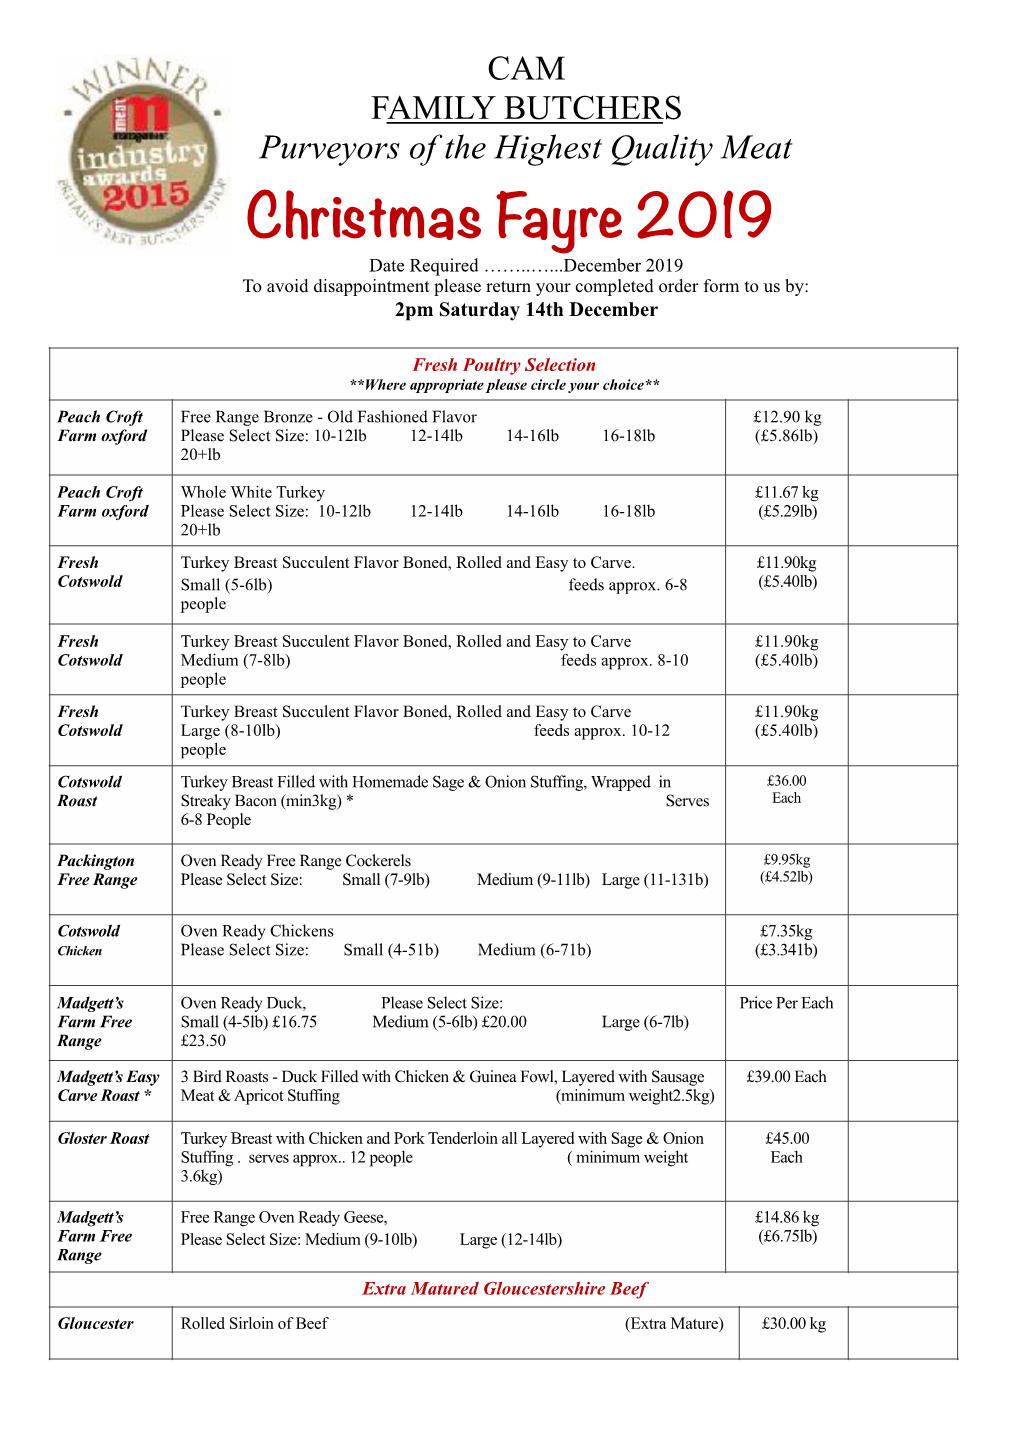 Christmas Fayre 2019 Date Required ……..…...December 2019 to Avoid Disappointment Please Return Your Completed Order Form to Us By: 2Pm Saturday 14Th December